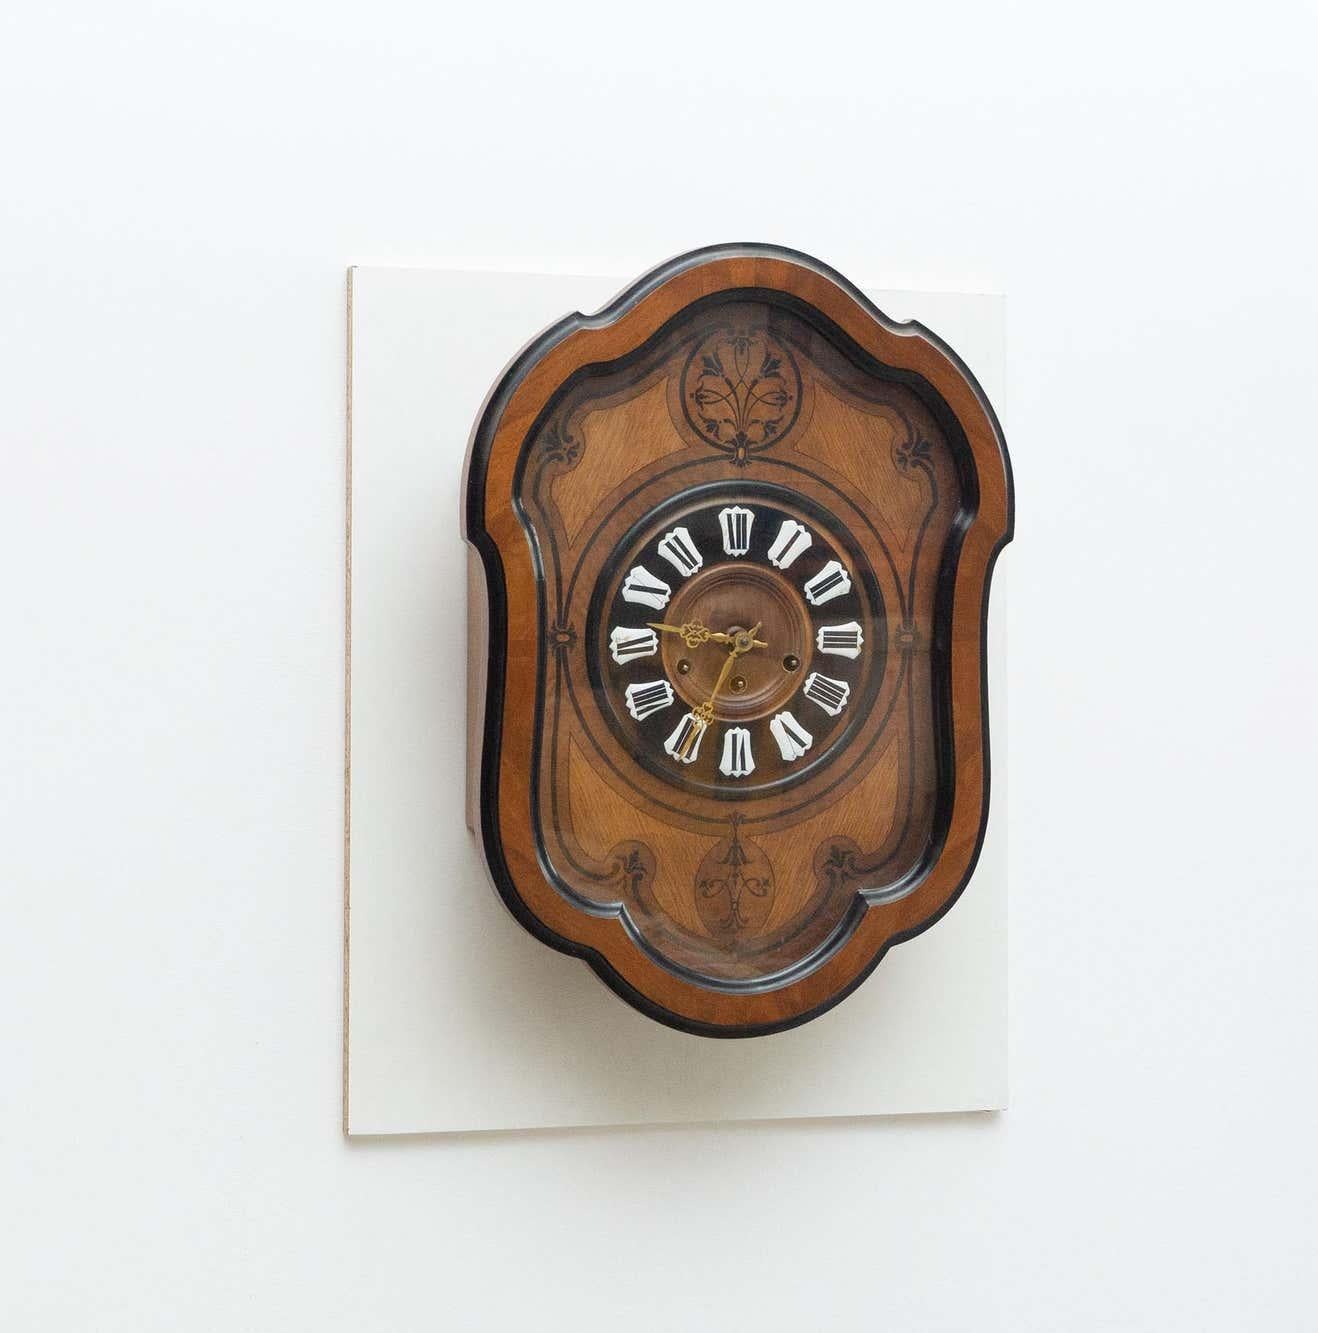 Antique traditional wall clock. By unknown manufacturer from Spain, circa 1930.
It works properly.  

In original condition, with minor wear consistent with age and use, preserving a beautiful